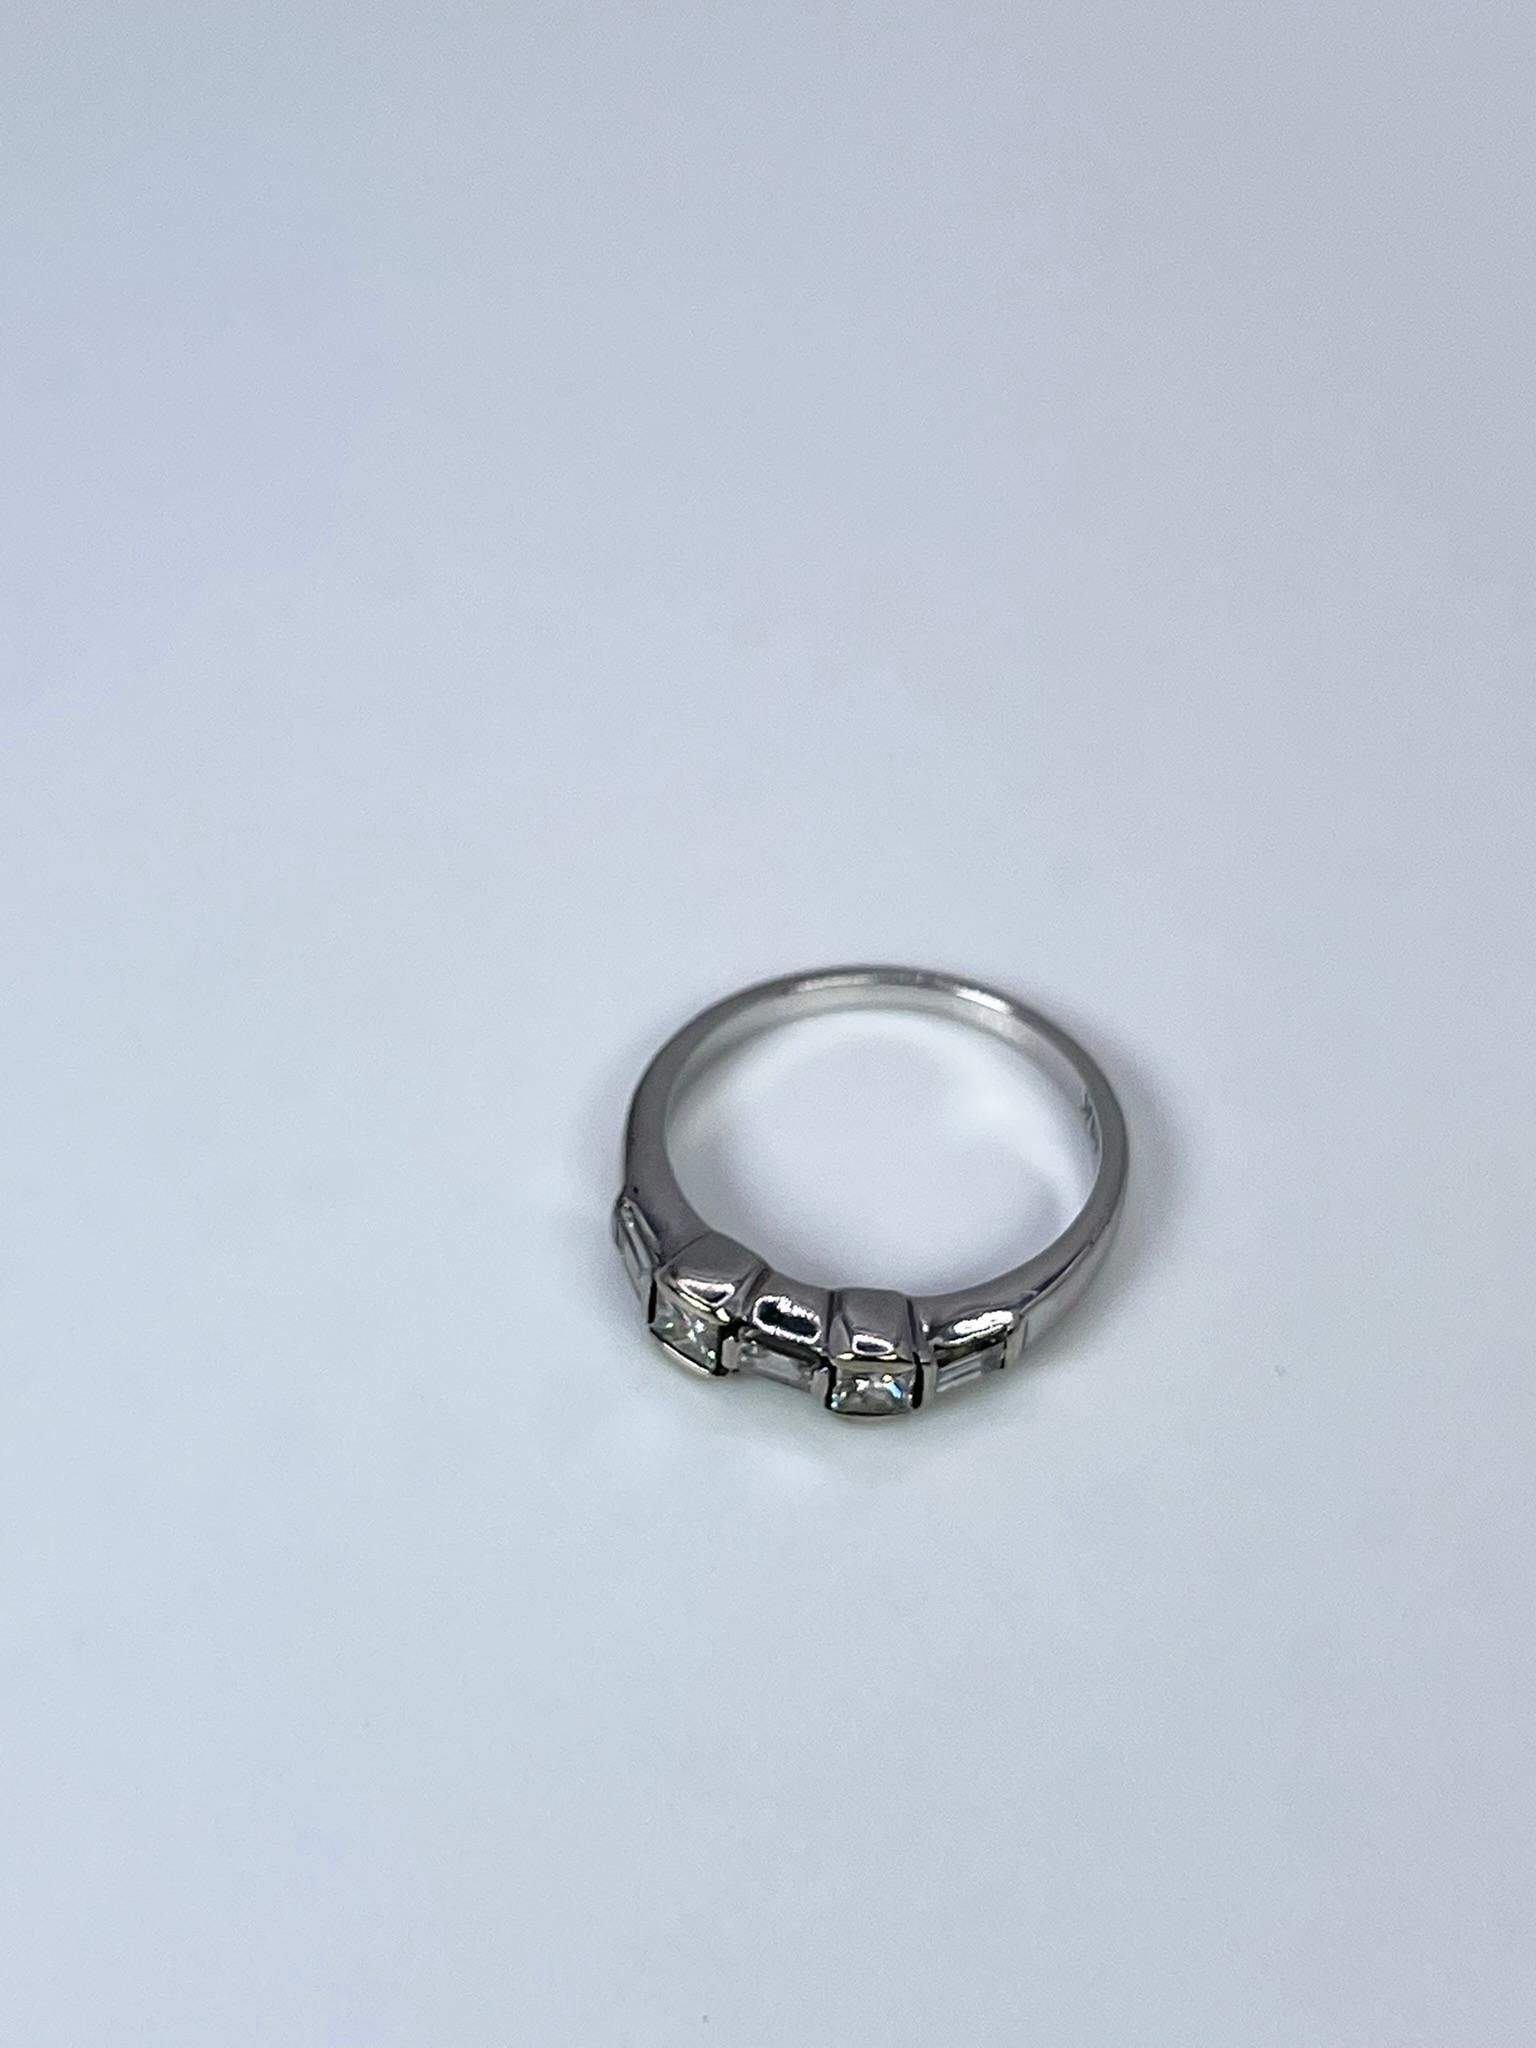 Early Victorian Antique Diamond Ring 14kt White Gold Princess Diamond Ring Baguette Diamond Ring For Sale